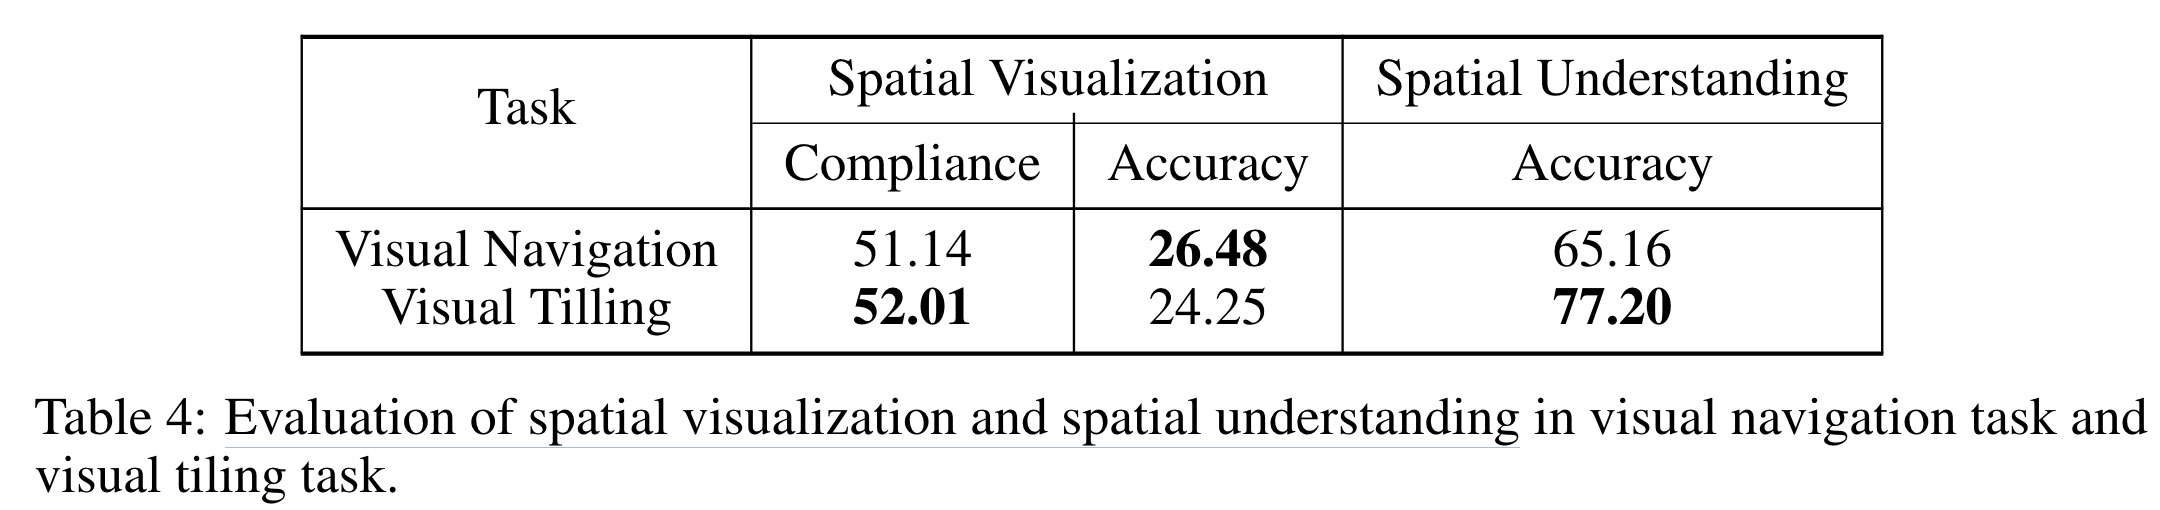 Evaluation of spatial visualization and spatial understanding